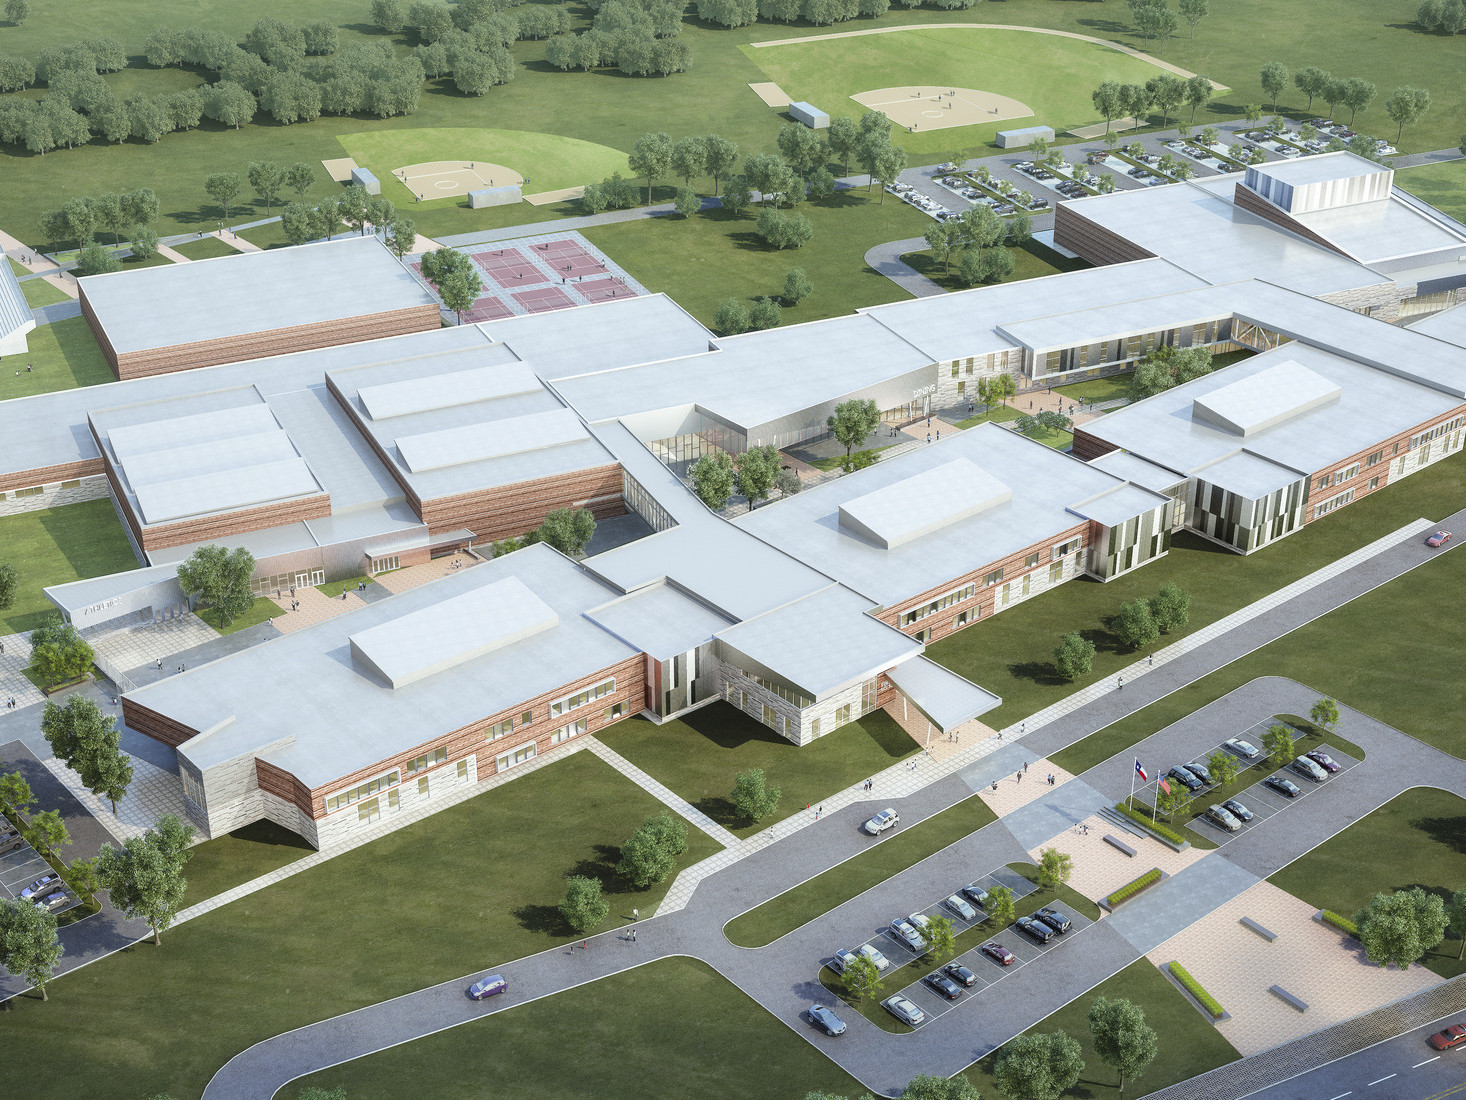 aerial view of a design concept for Fort Bend ISD High School, a large 500,000 sf school facility along an axis